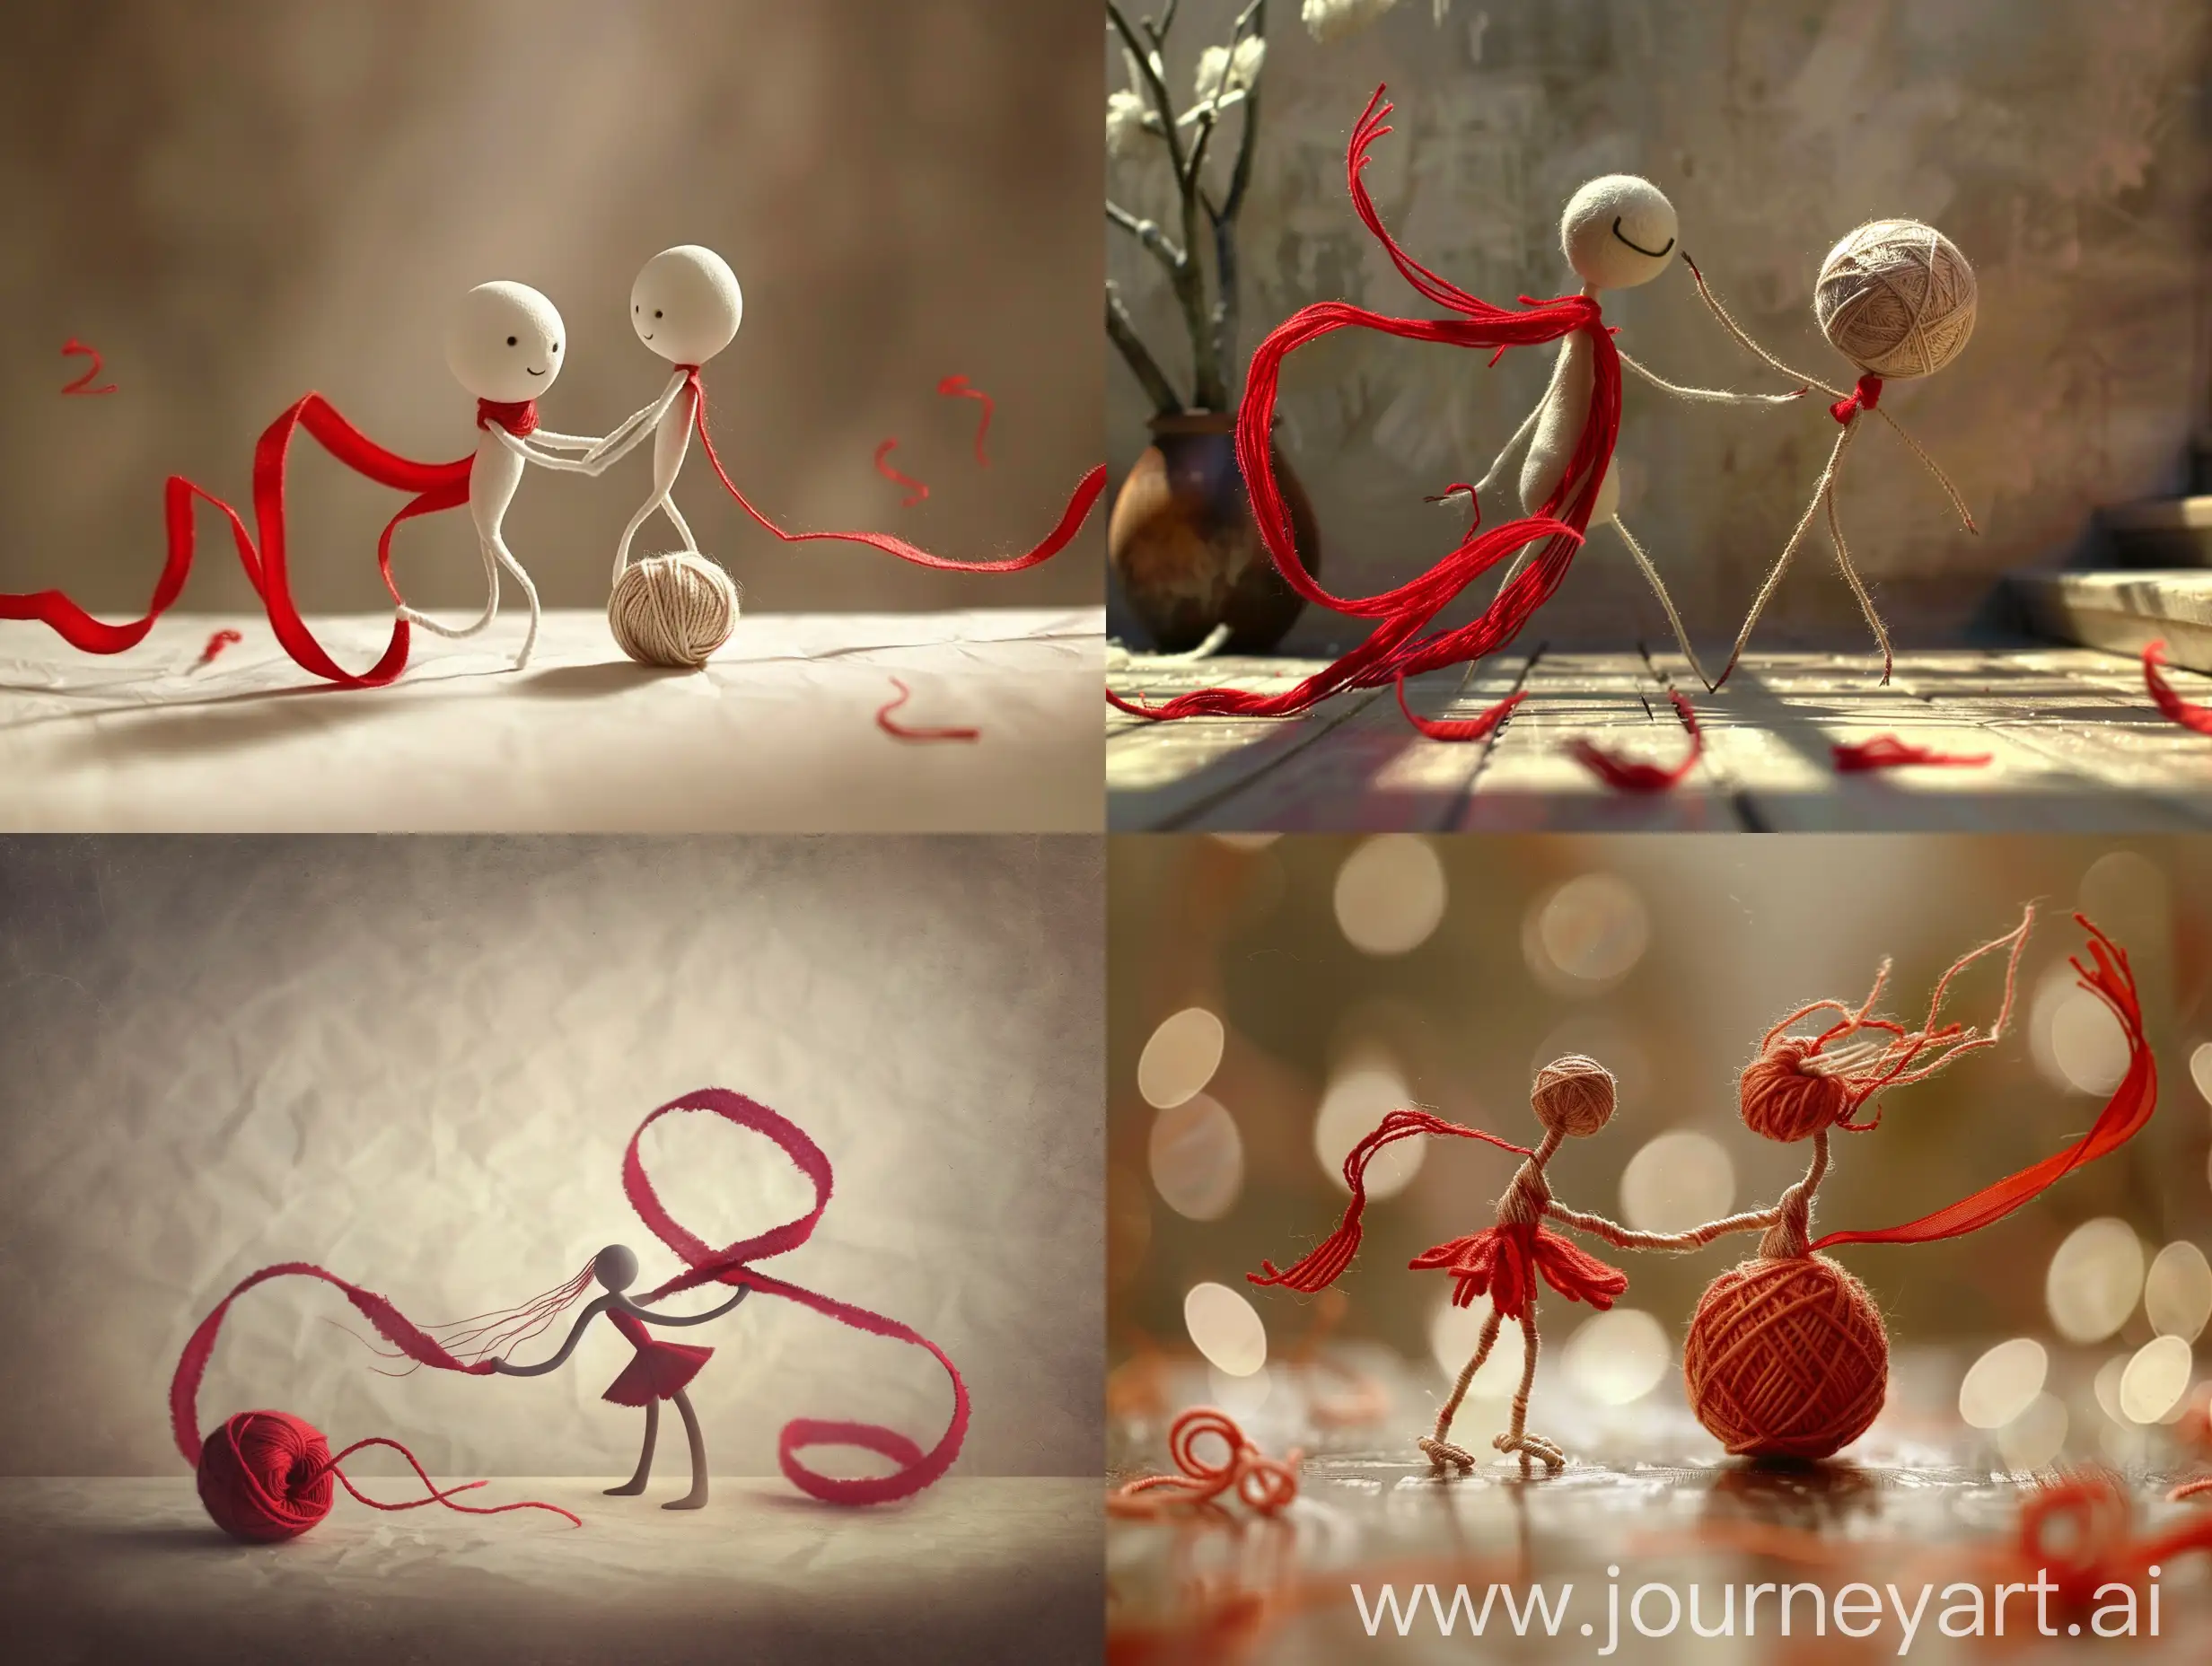 scene from an art film about an enchanted dancing red ribbon sharing tender moment with ball of yarn ar